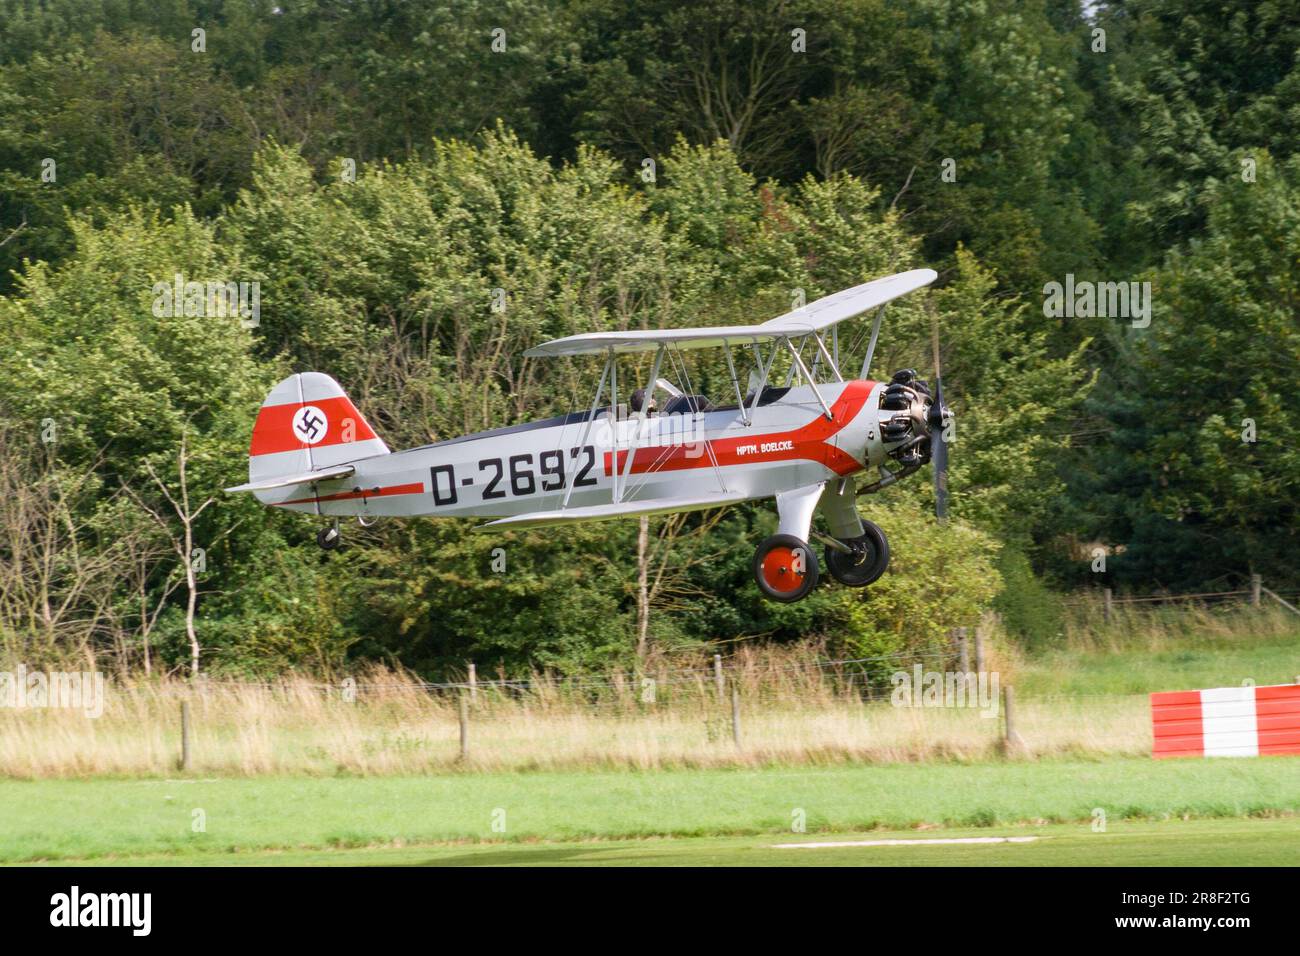 A Flying Day at the Shuttleworth Collection with Focke-Wulf D-2692 , Old Warden, Bedfordshire in 2009 Stock Photo